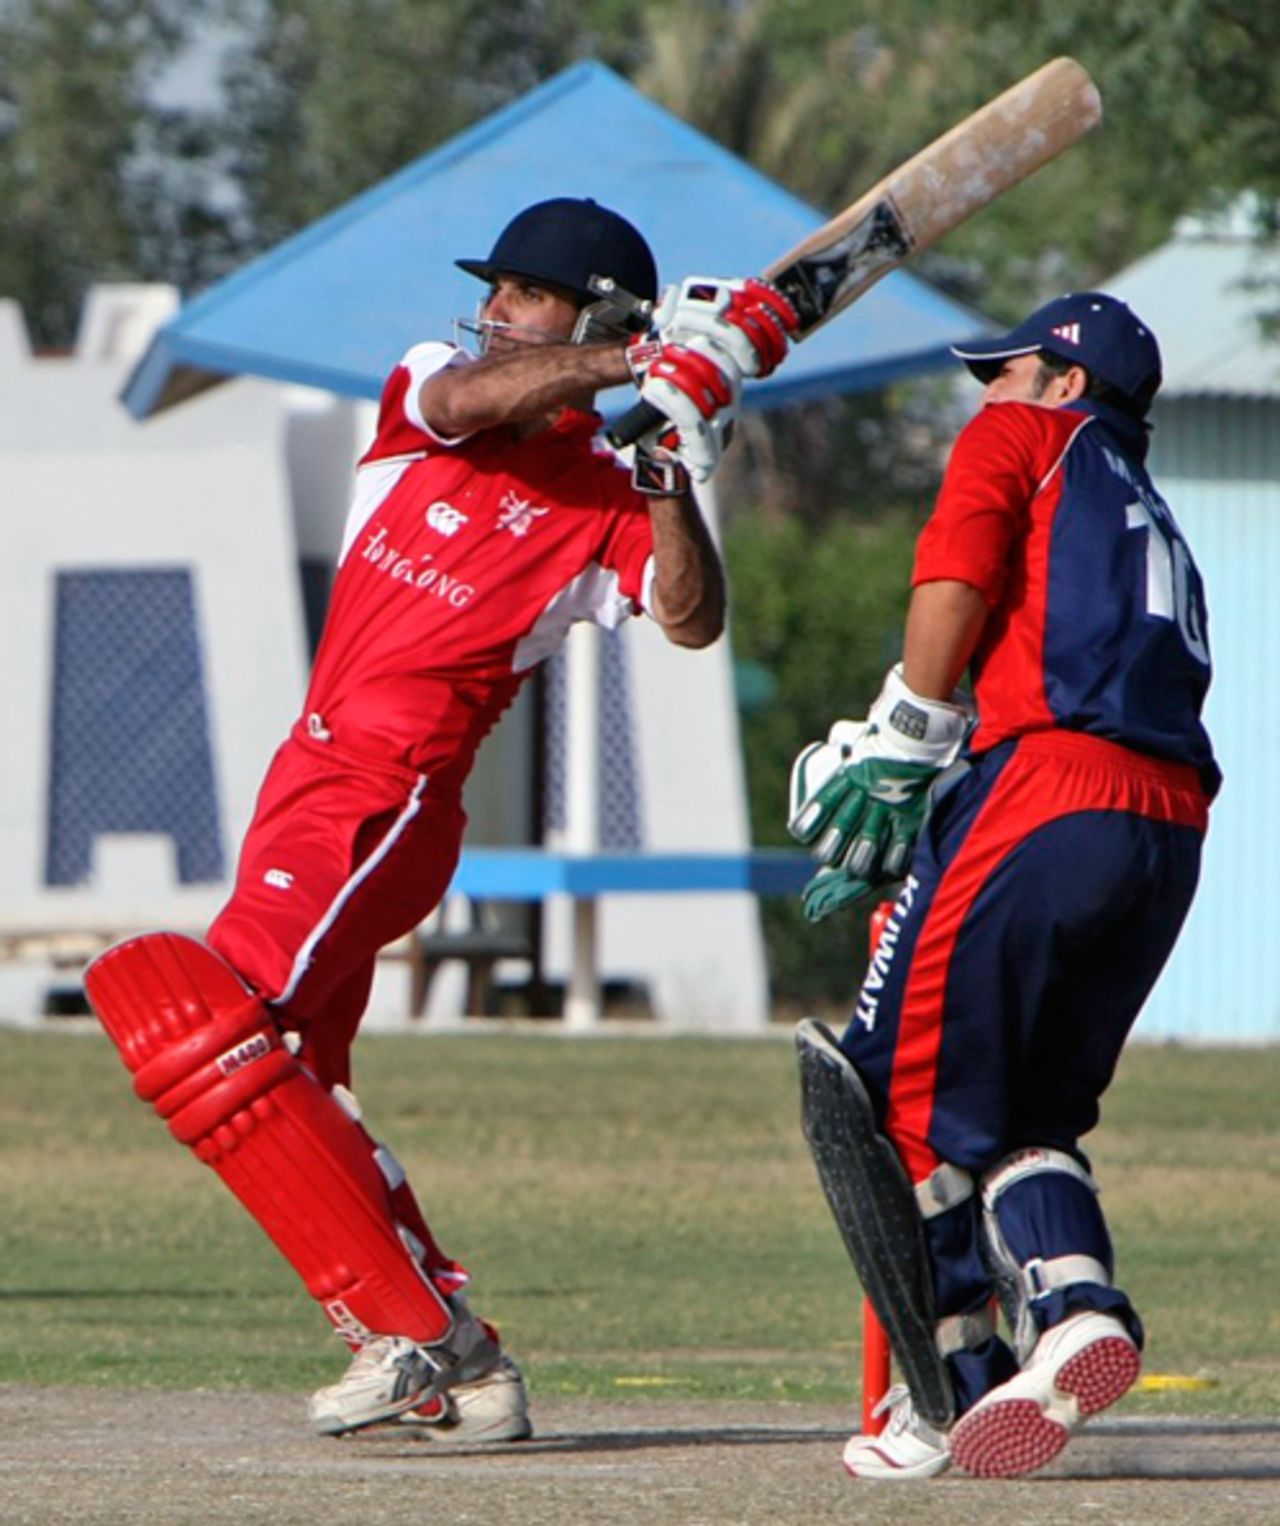 Hussain Butt led Hong Kong to victory over Kuwait with a fine unbeaten 82 in their ACC Trophy Elite 2010 encounter in Kuwait